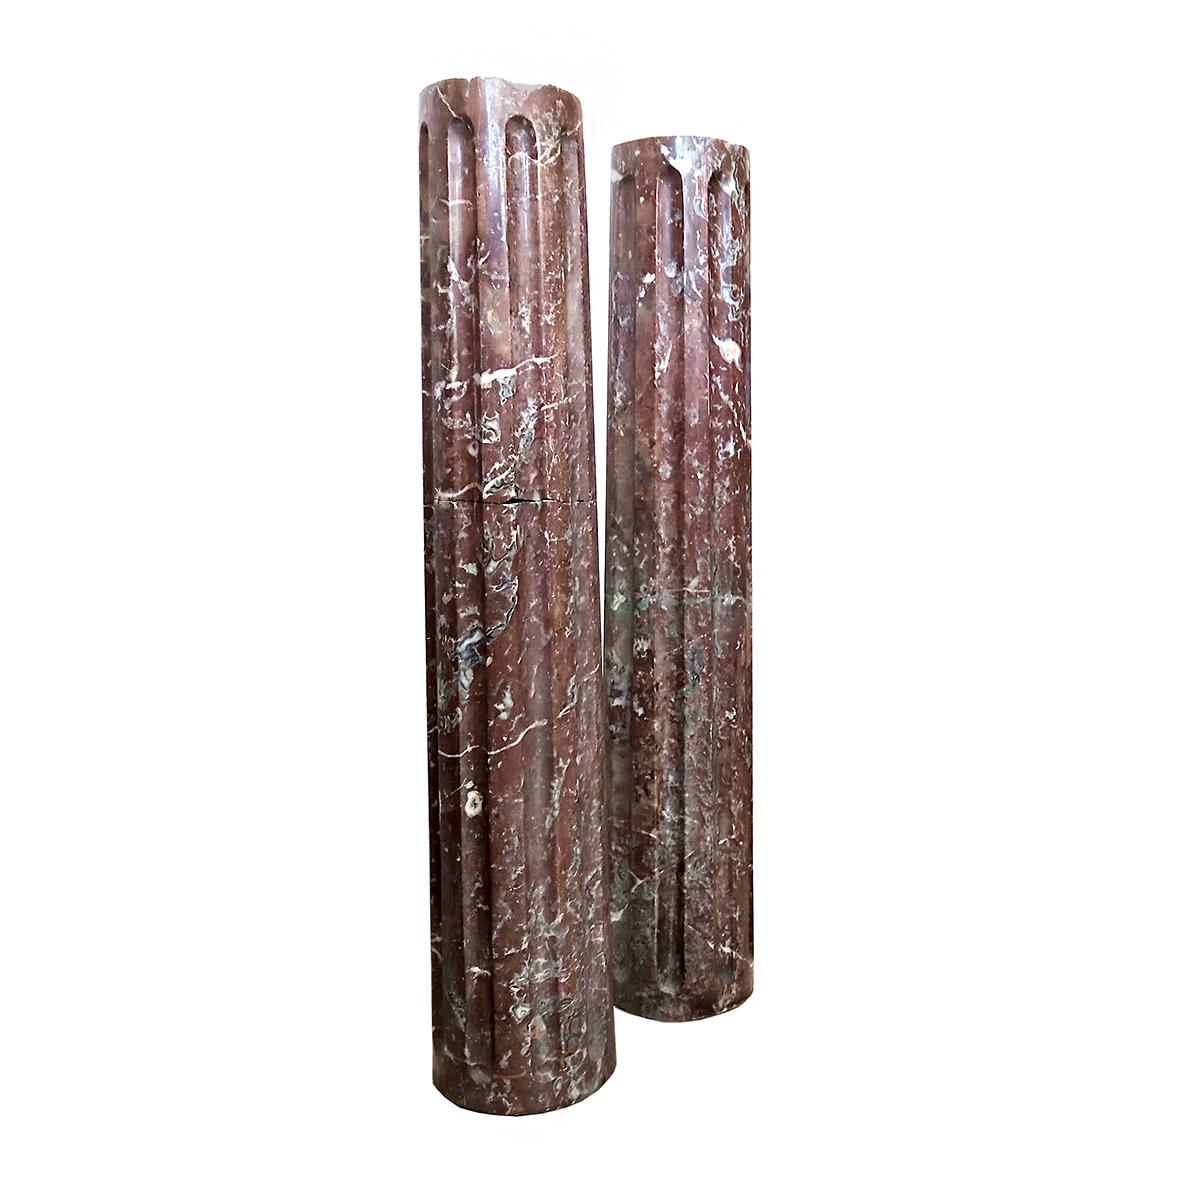 Baroque Revival Mid-19th Century Red Marble Columns For Sale